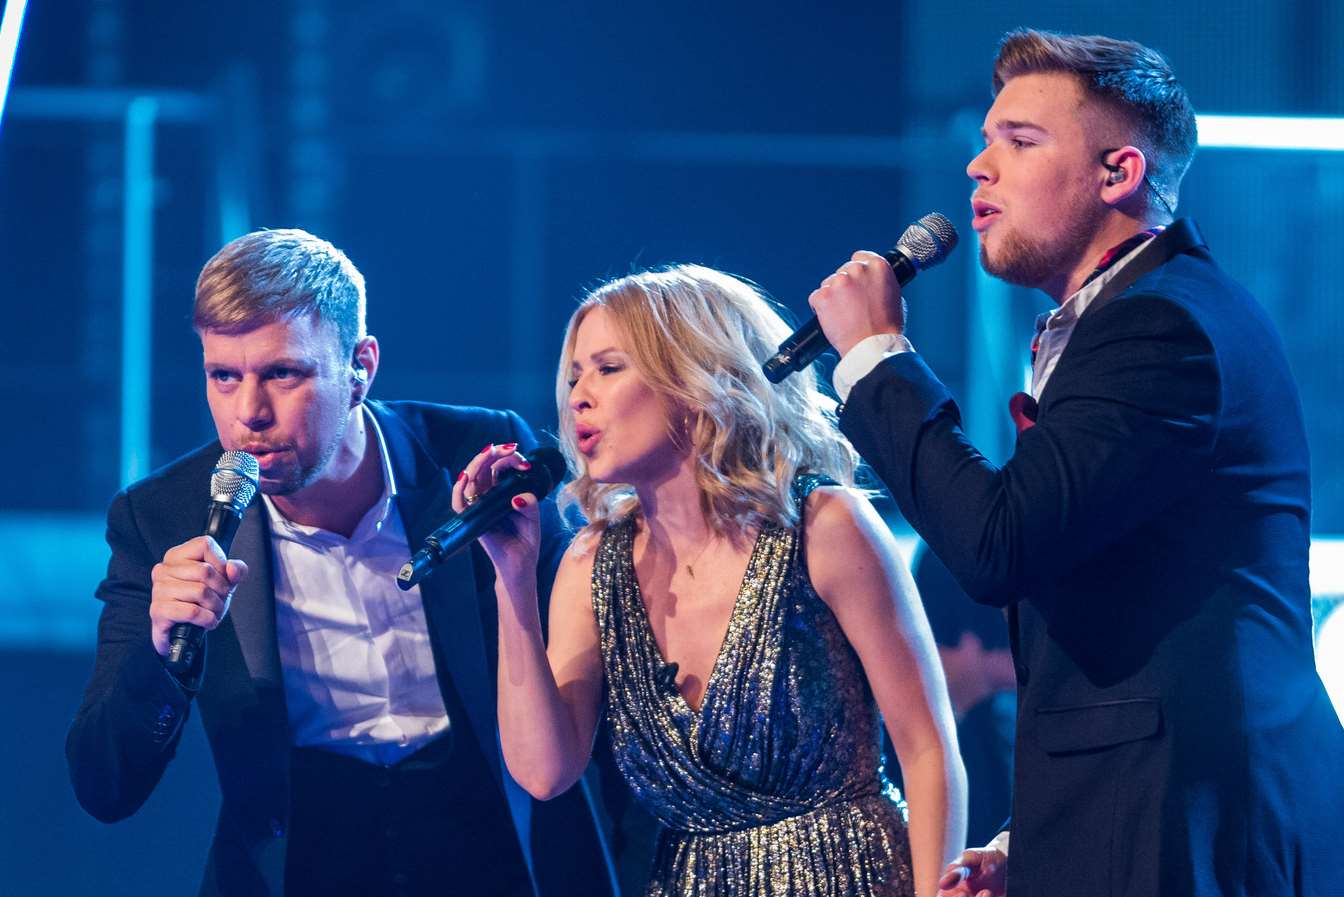 Jamie Johnson singing Into The Blue with Kylie and Lee on The Voice on Saturday March 29. Image courtesy of the BBC.